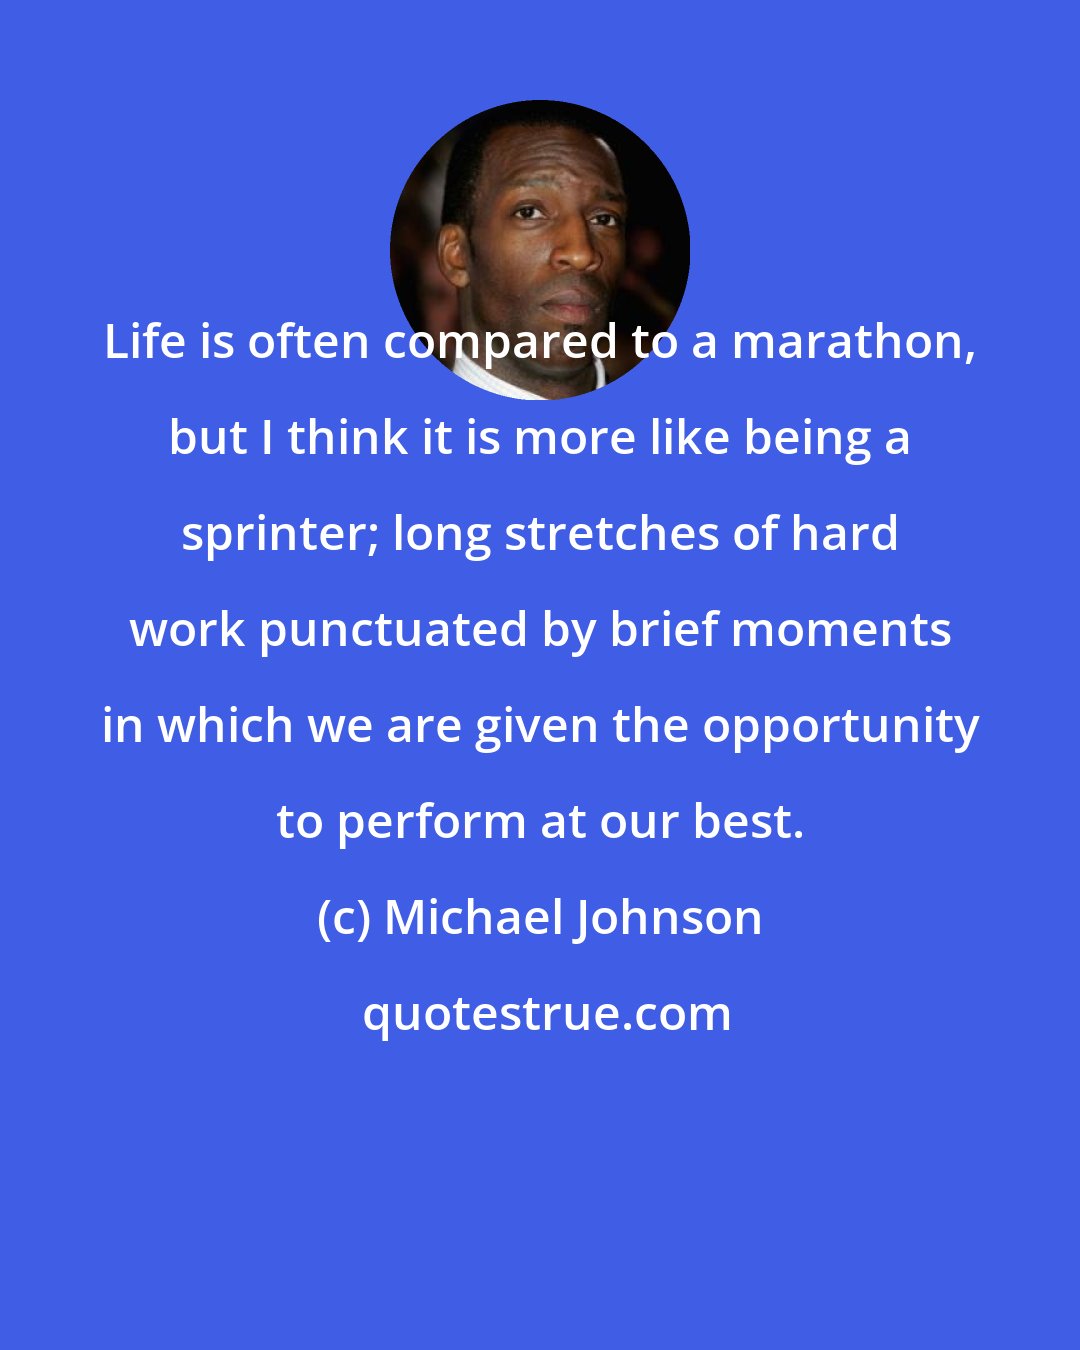 Michael Johnson: Life is often compared to a marathon, but I think it is more like being a sprinter; long stretches of hard work punctuated by brief moments in which we are given the opportunity to perform at our best.